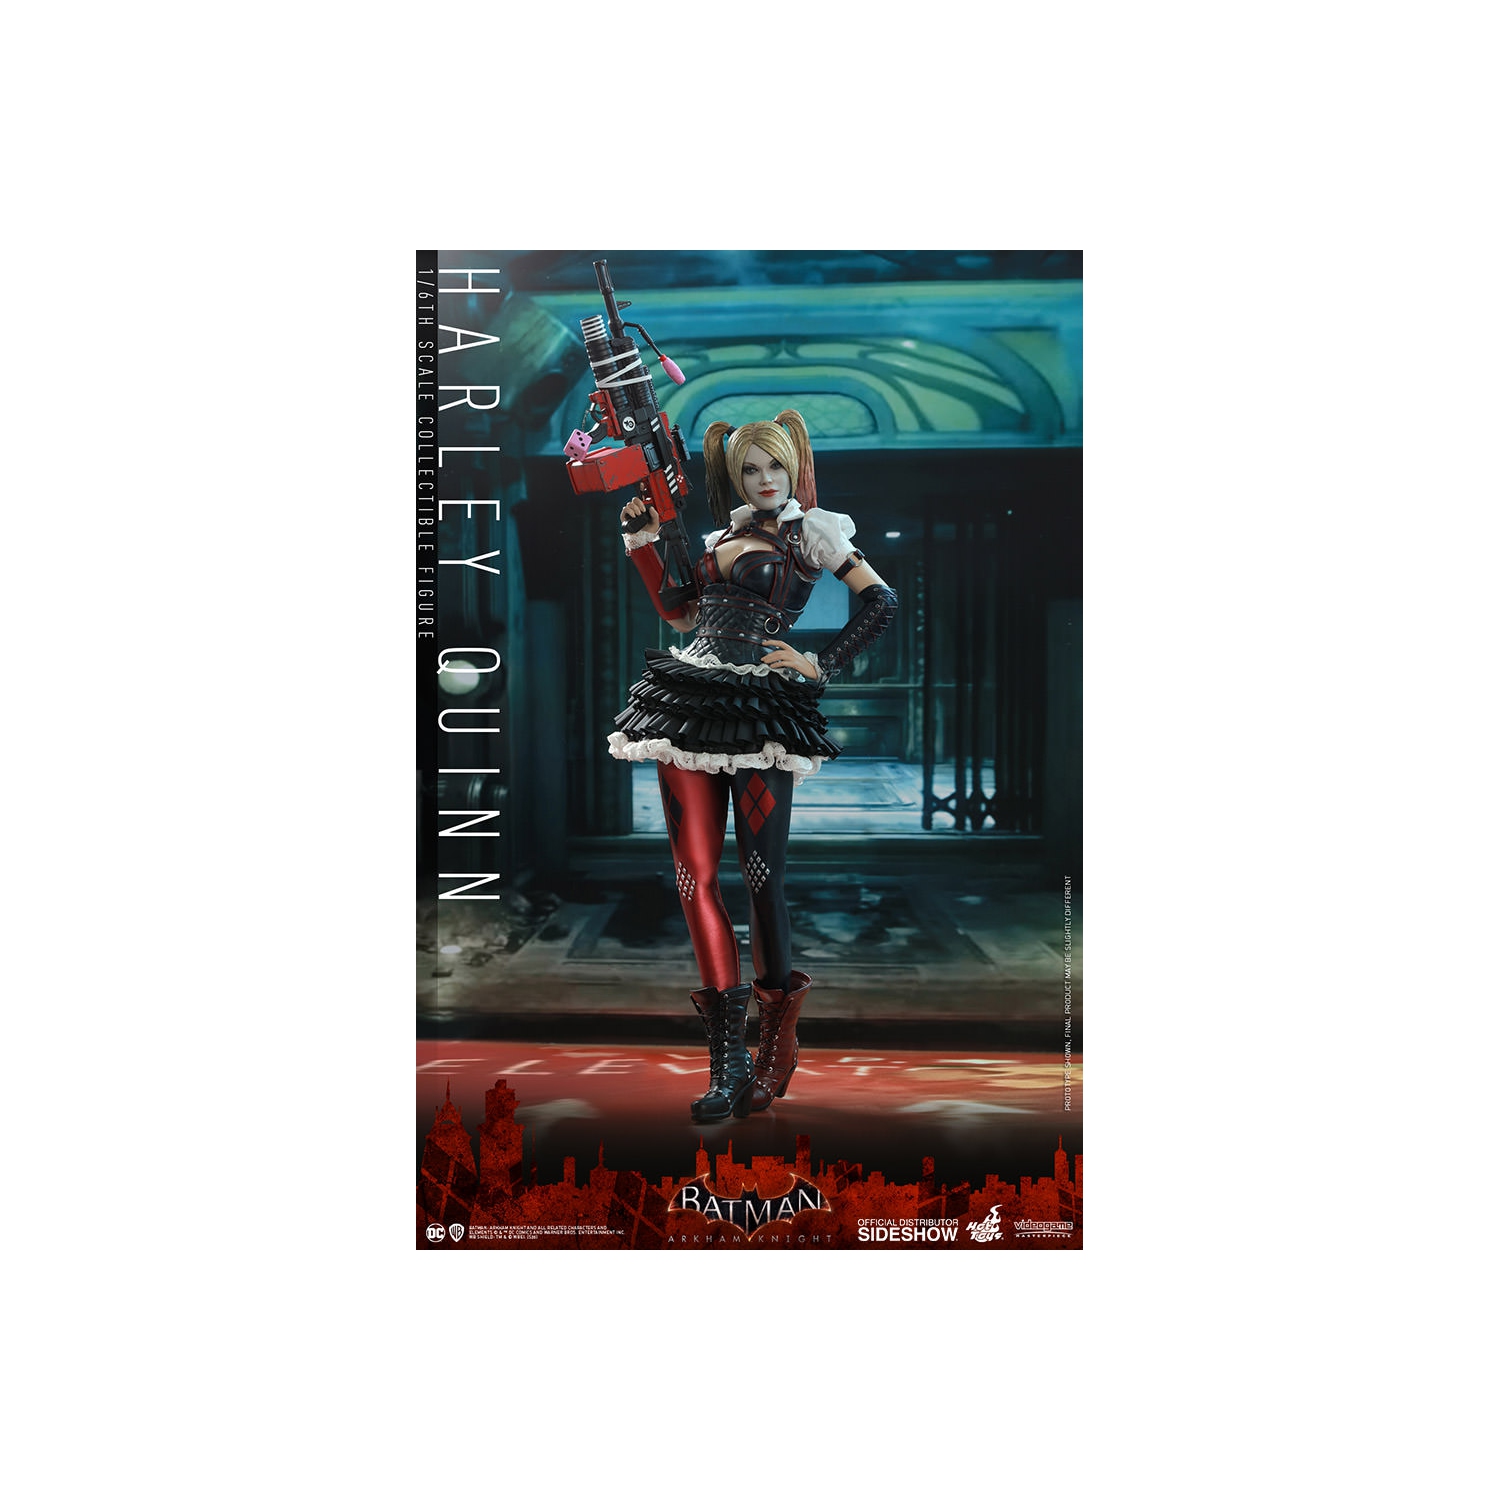 Batman Arkham Knight 11 Inch Action Figure 1/6 Scale Series - Harley Quinn Hot Toys 906232